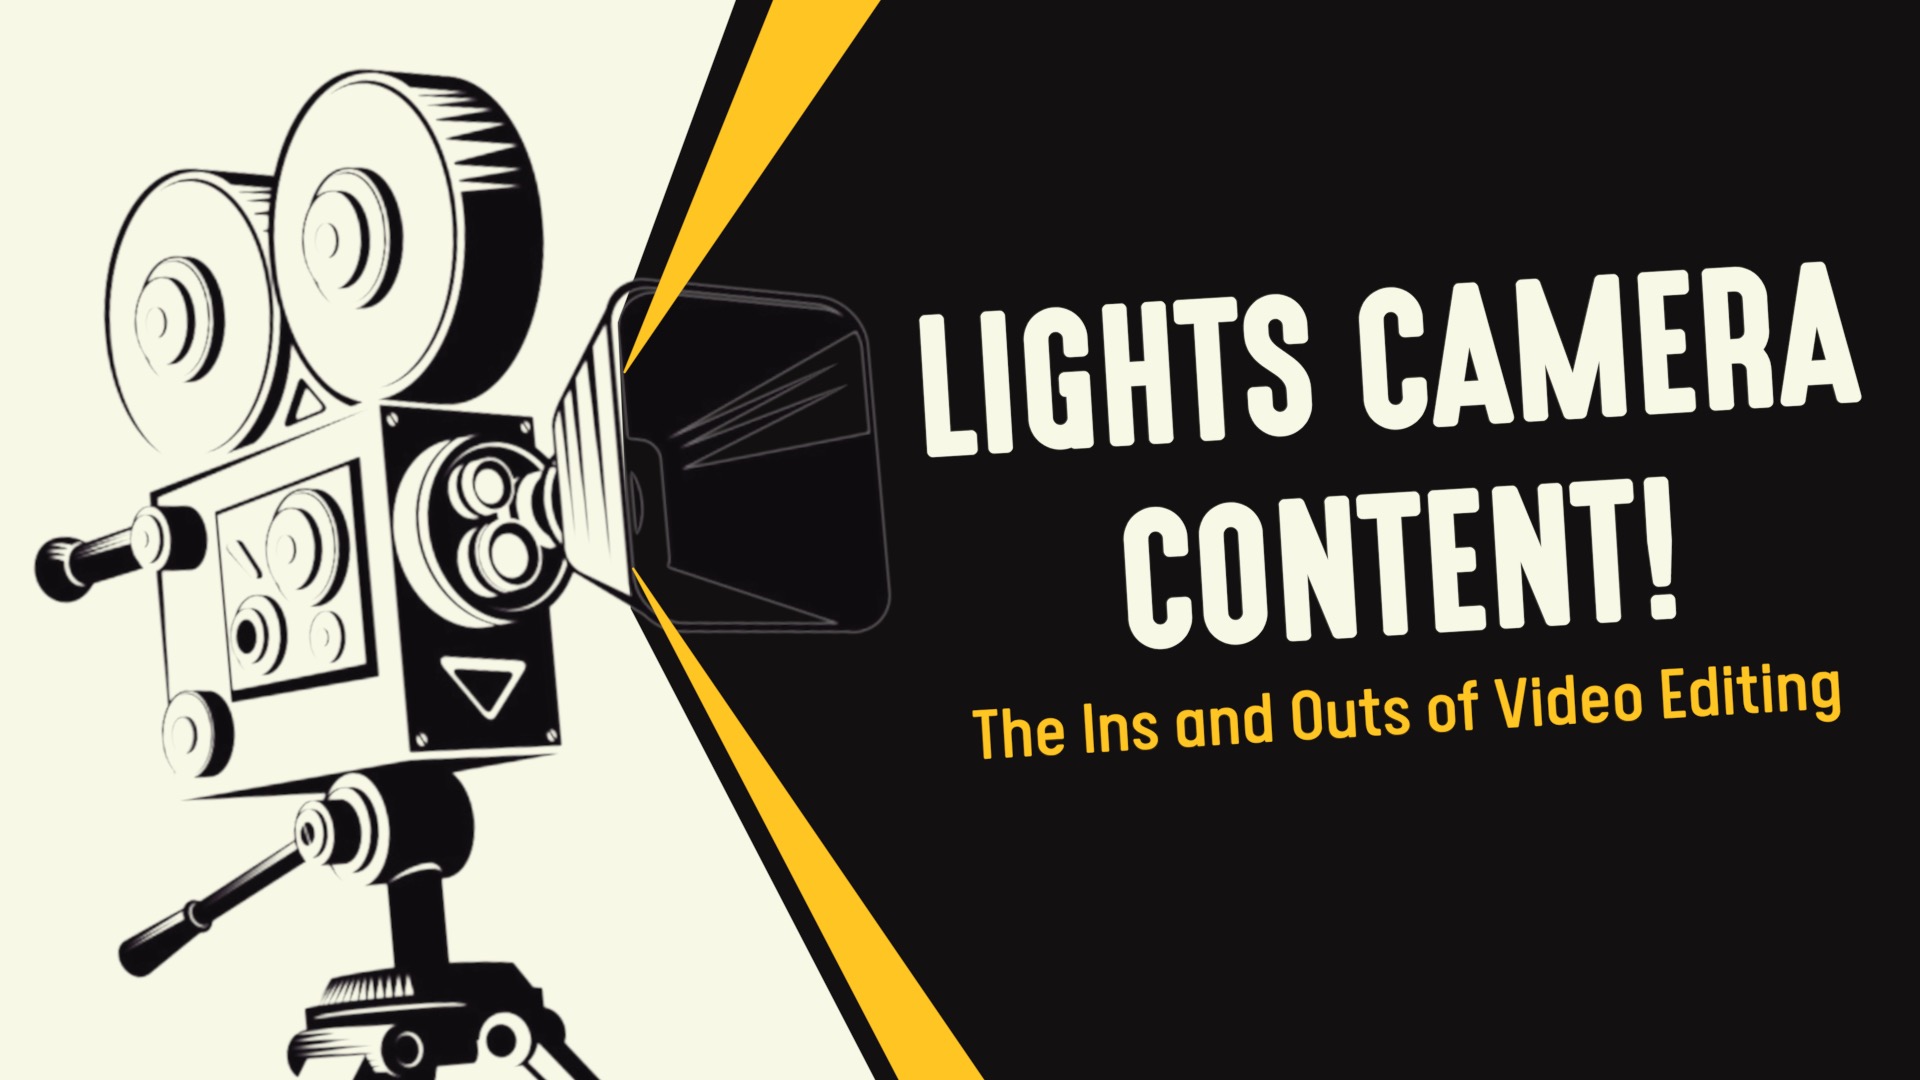 Lights Camera Content! The Ins and Outs of Video Editing